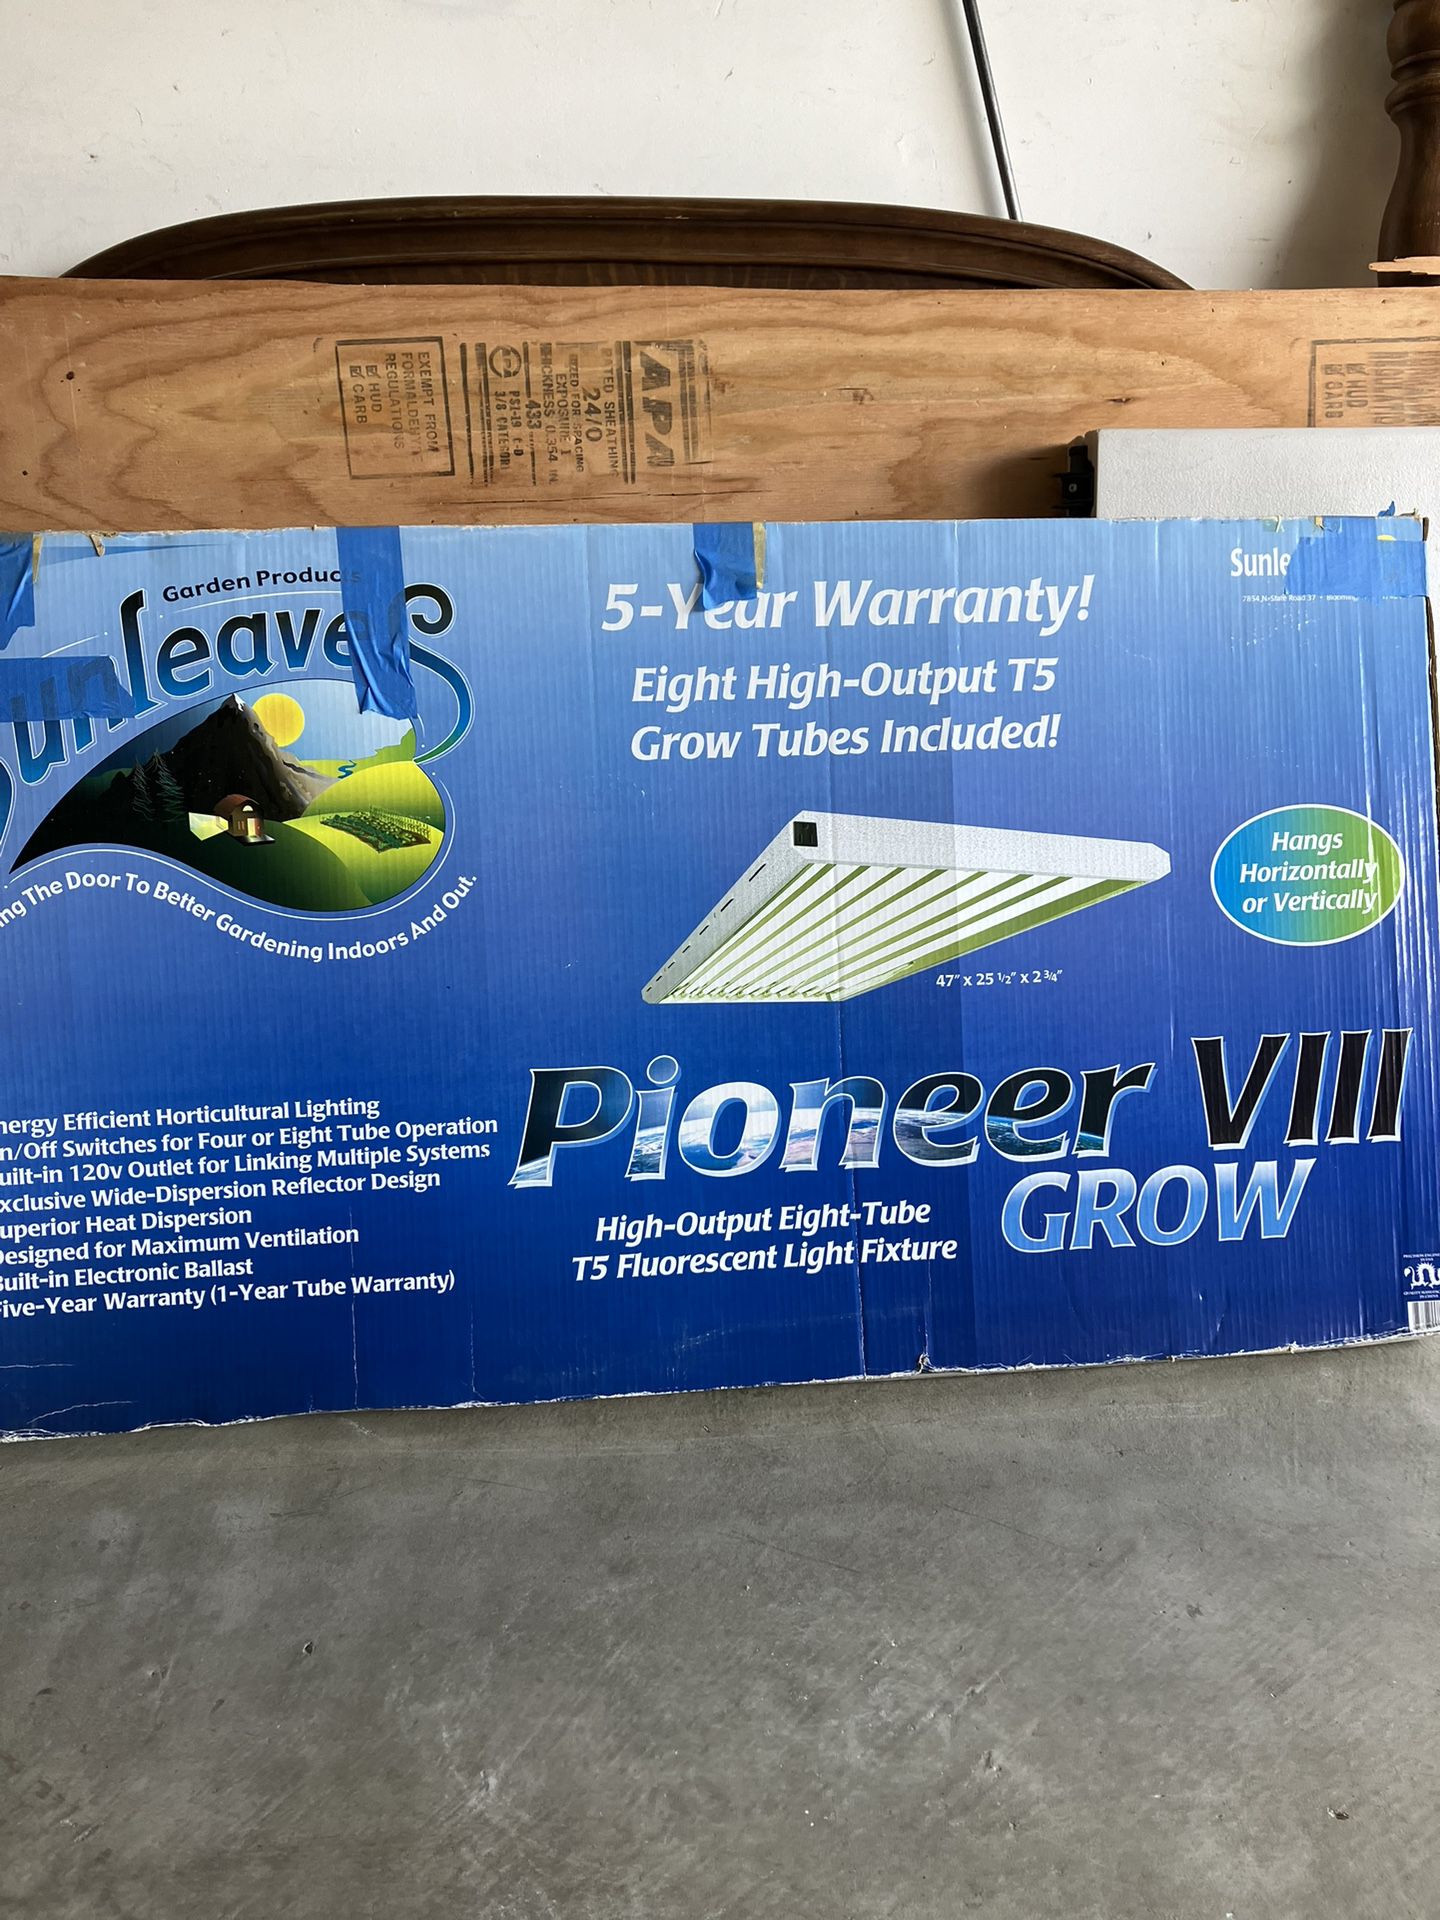 2 X 4‘ Fluorescent Grow Light With Newer Grow Bulbs. Local pick up only.